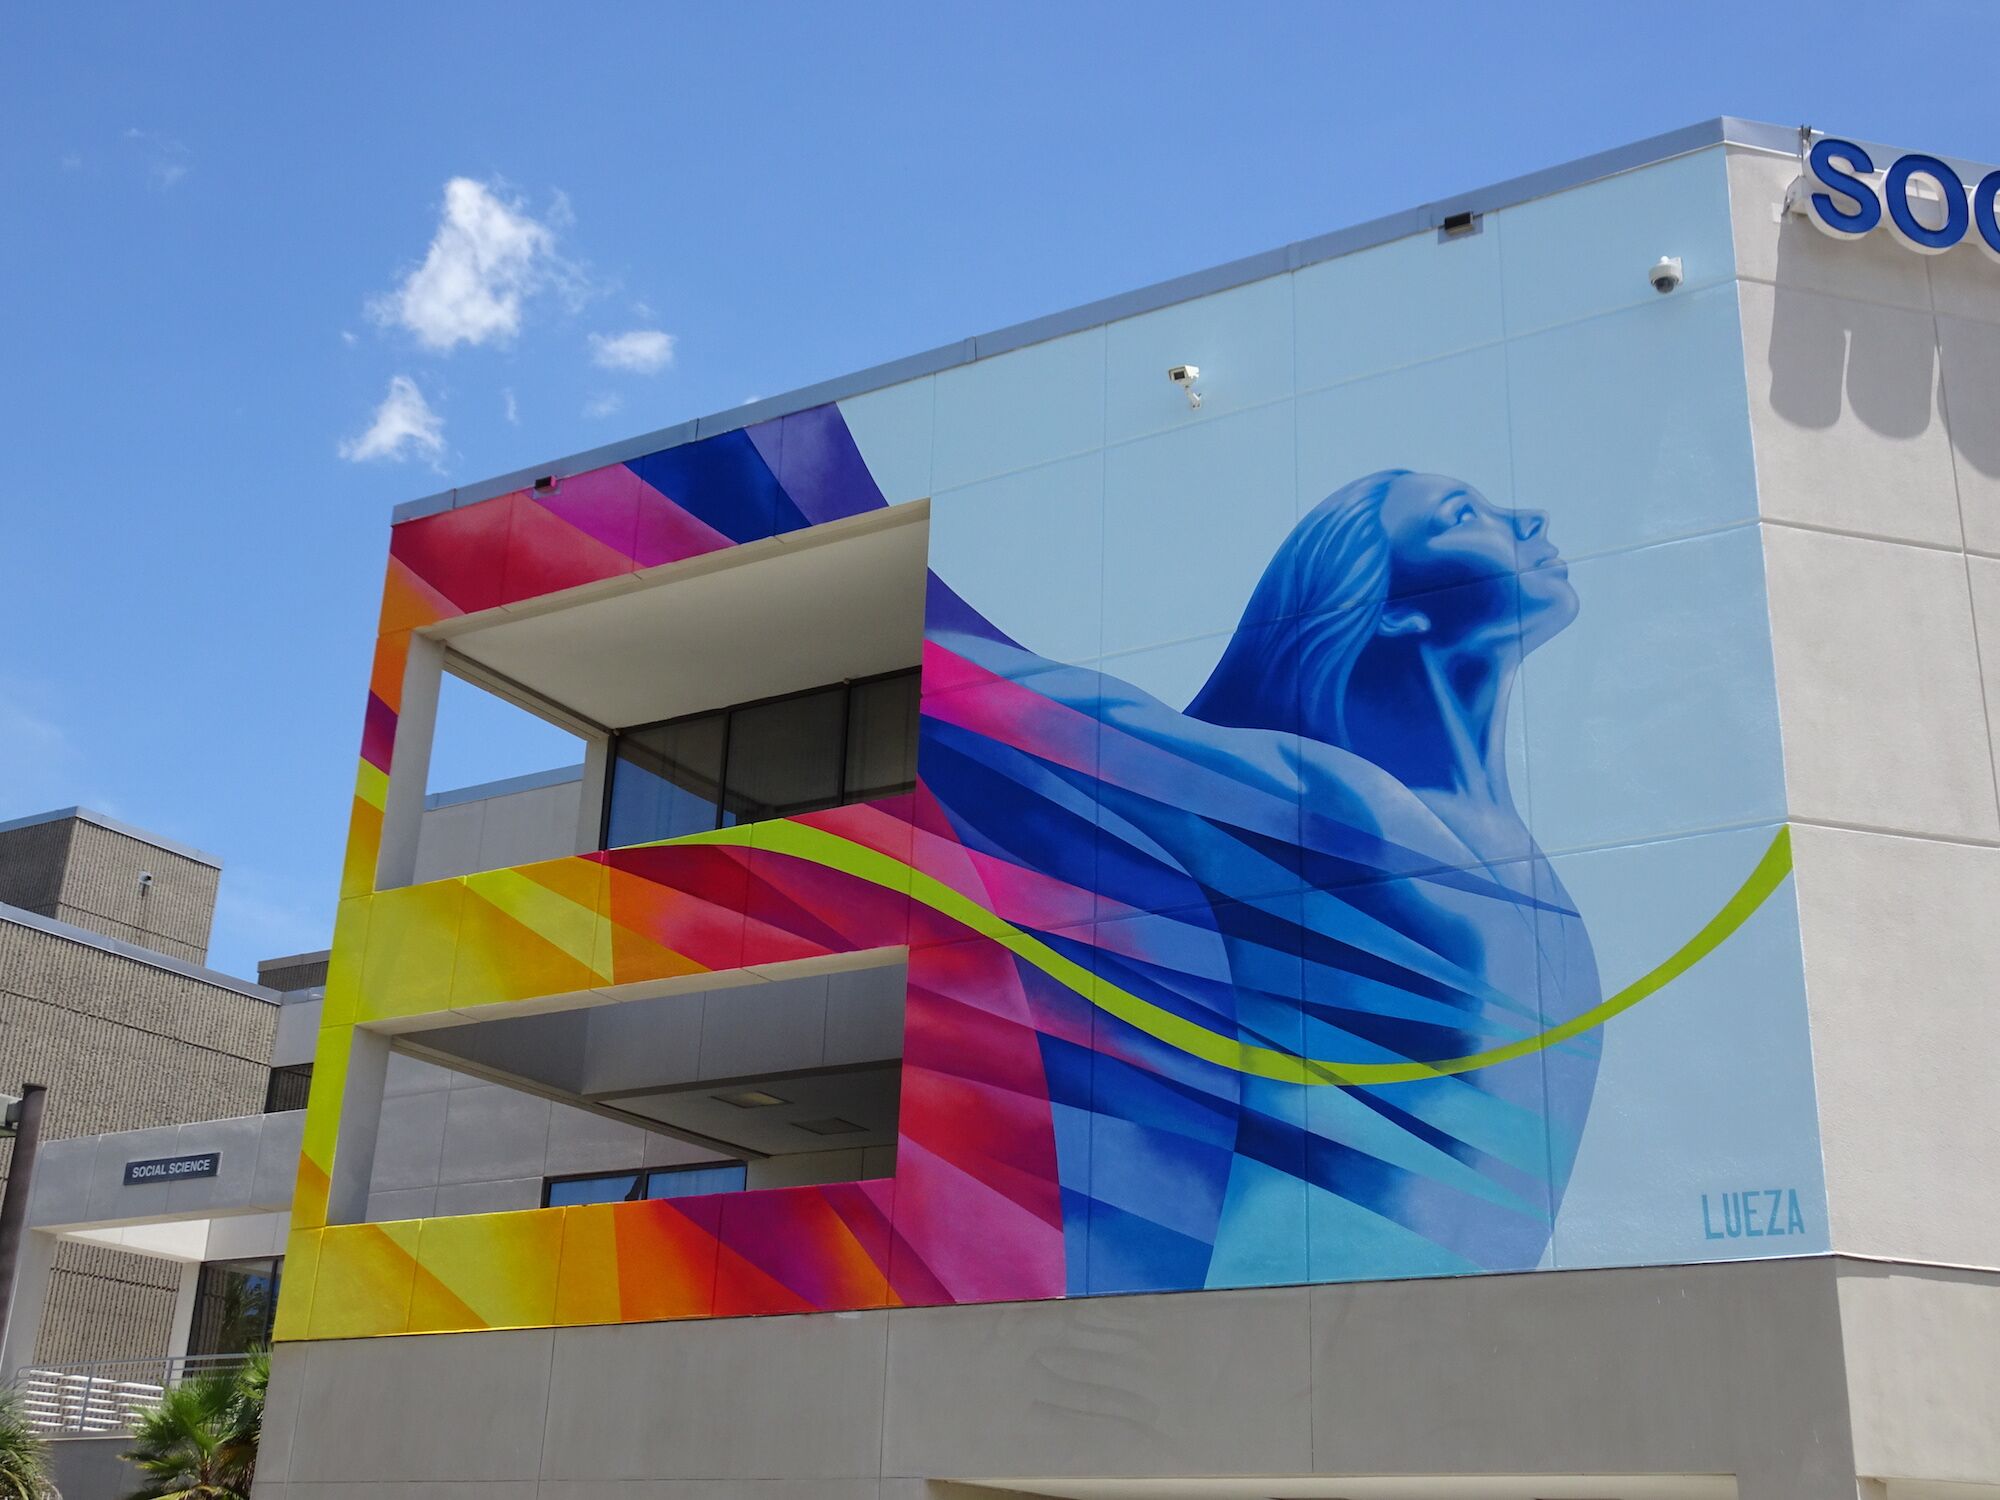 Colorful mural of a woman with arms lifted